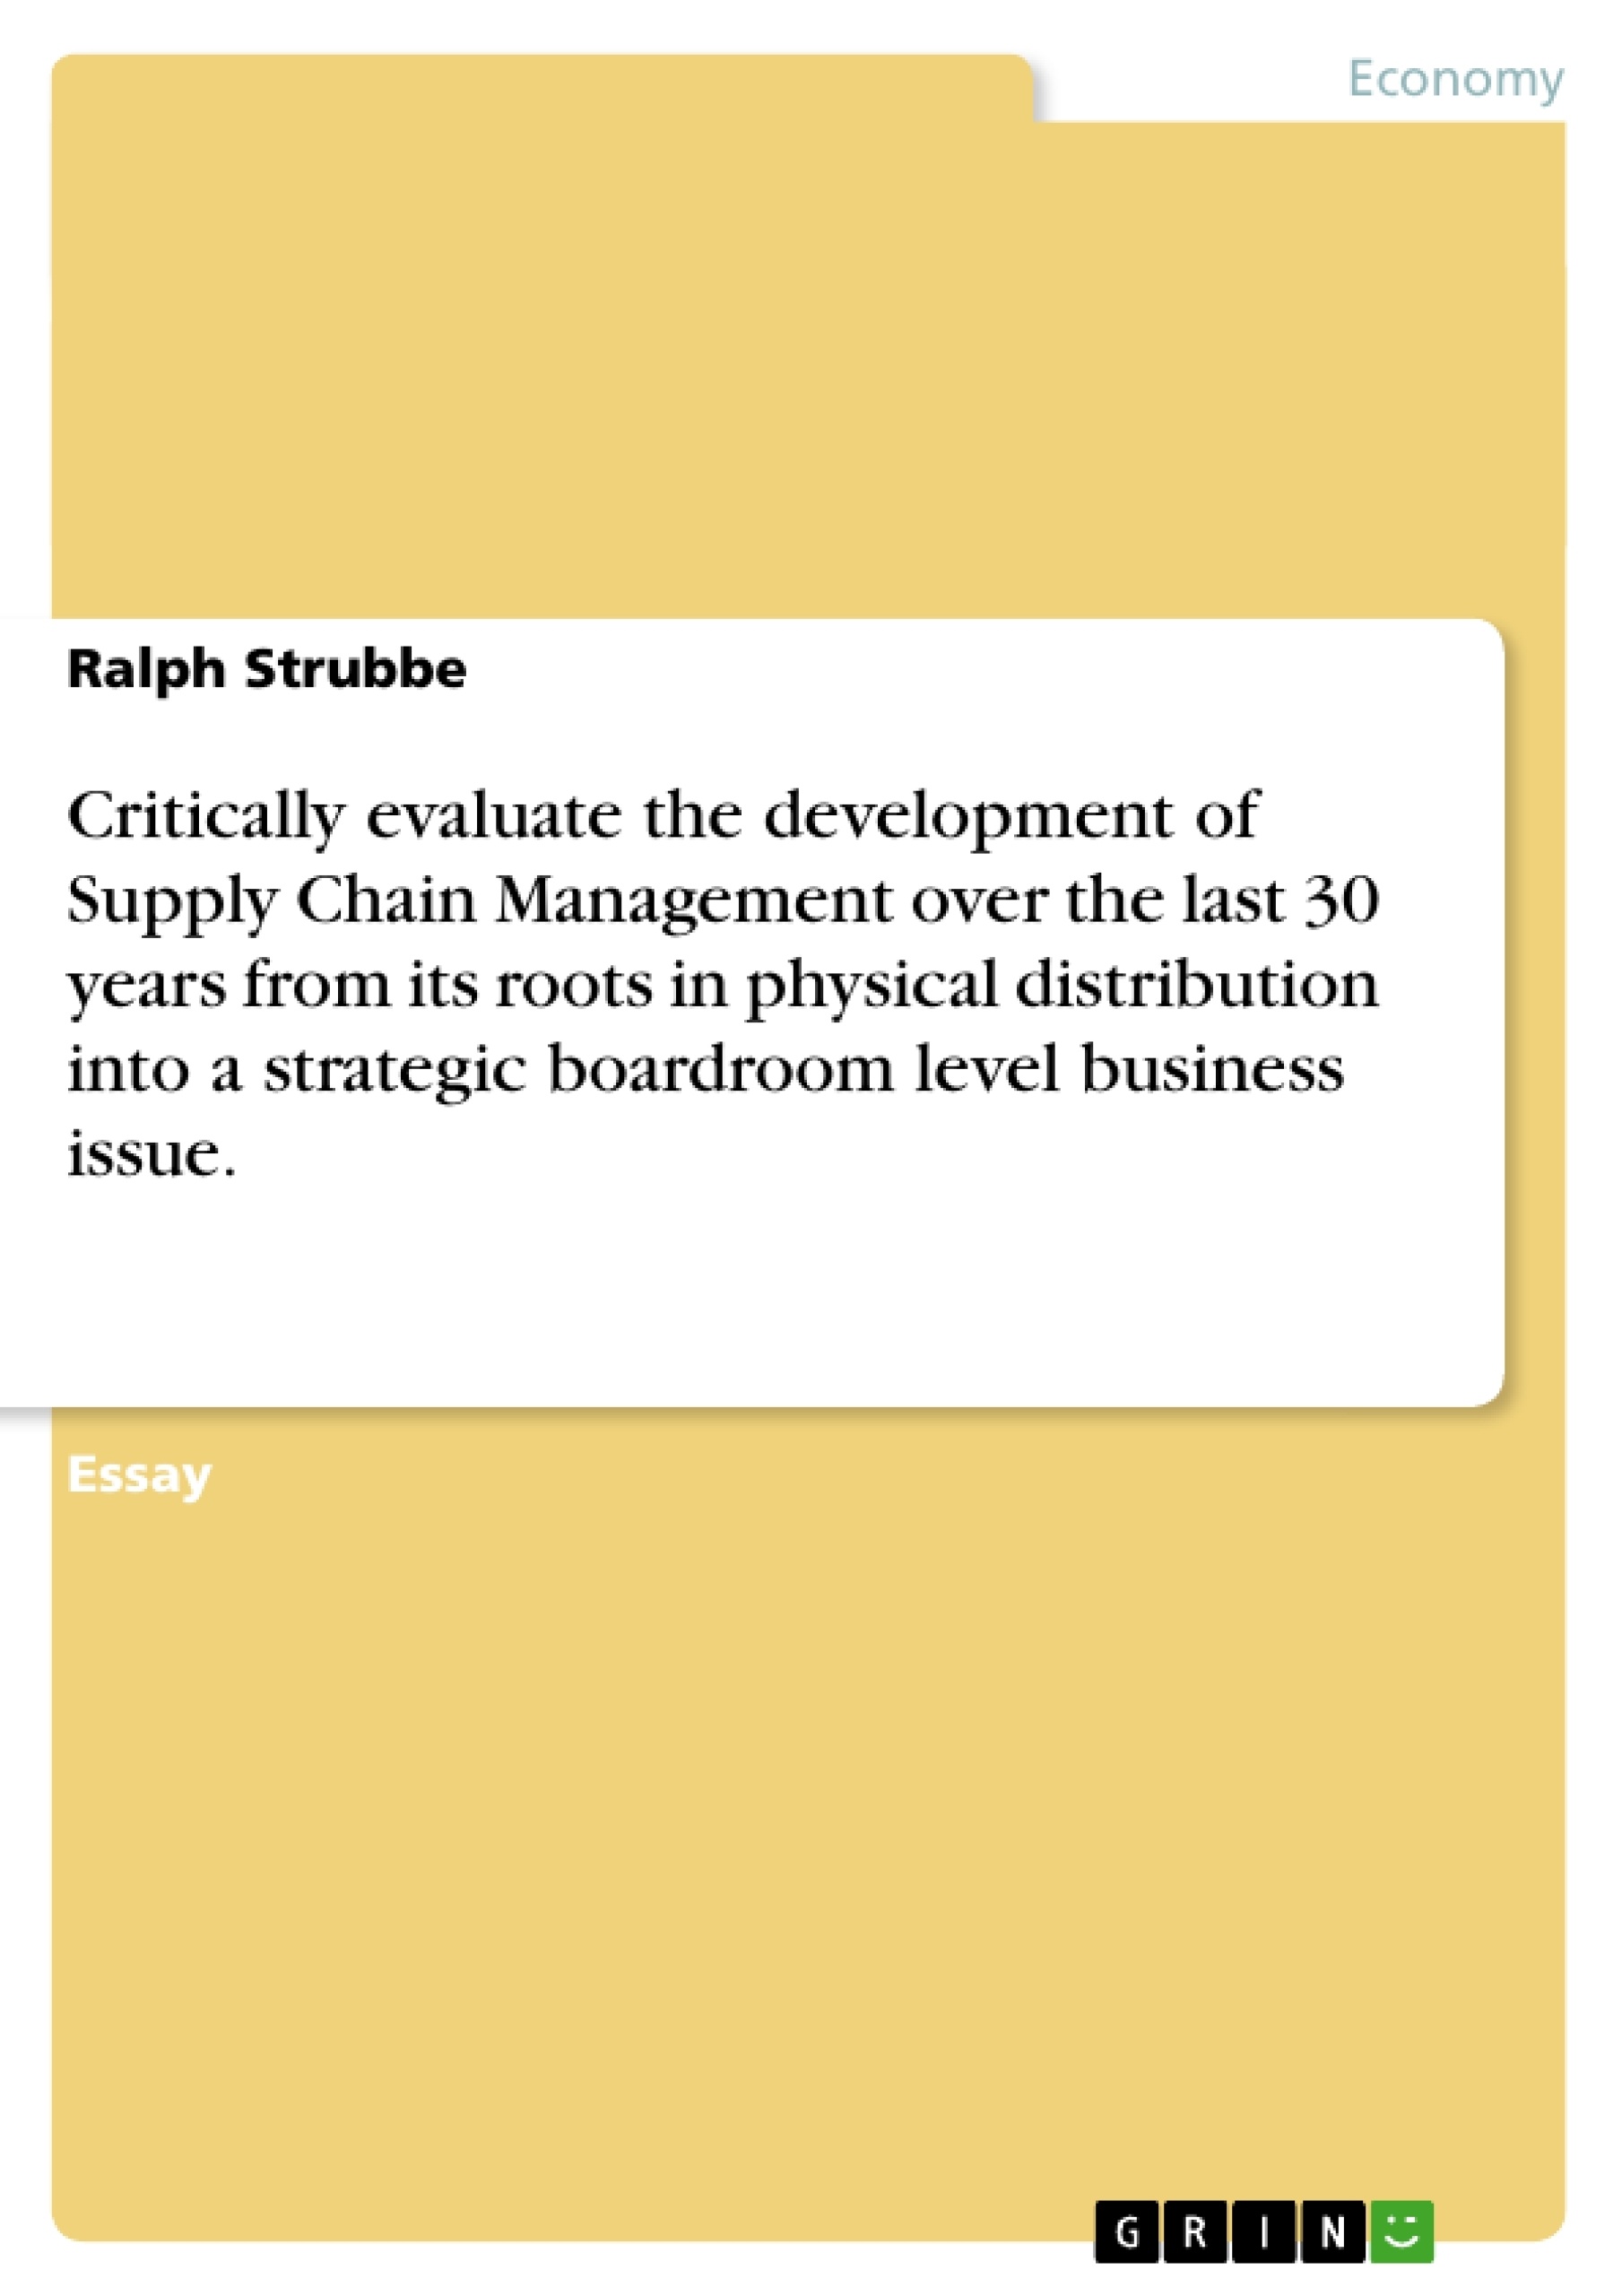 Title: Critically evaluate the development of Supply Chain Management over the last 30 years from its roots in physical distribution into a strategic boardroom level business issue. 